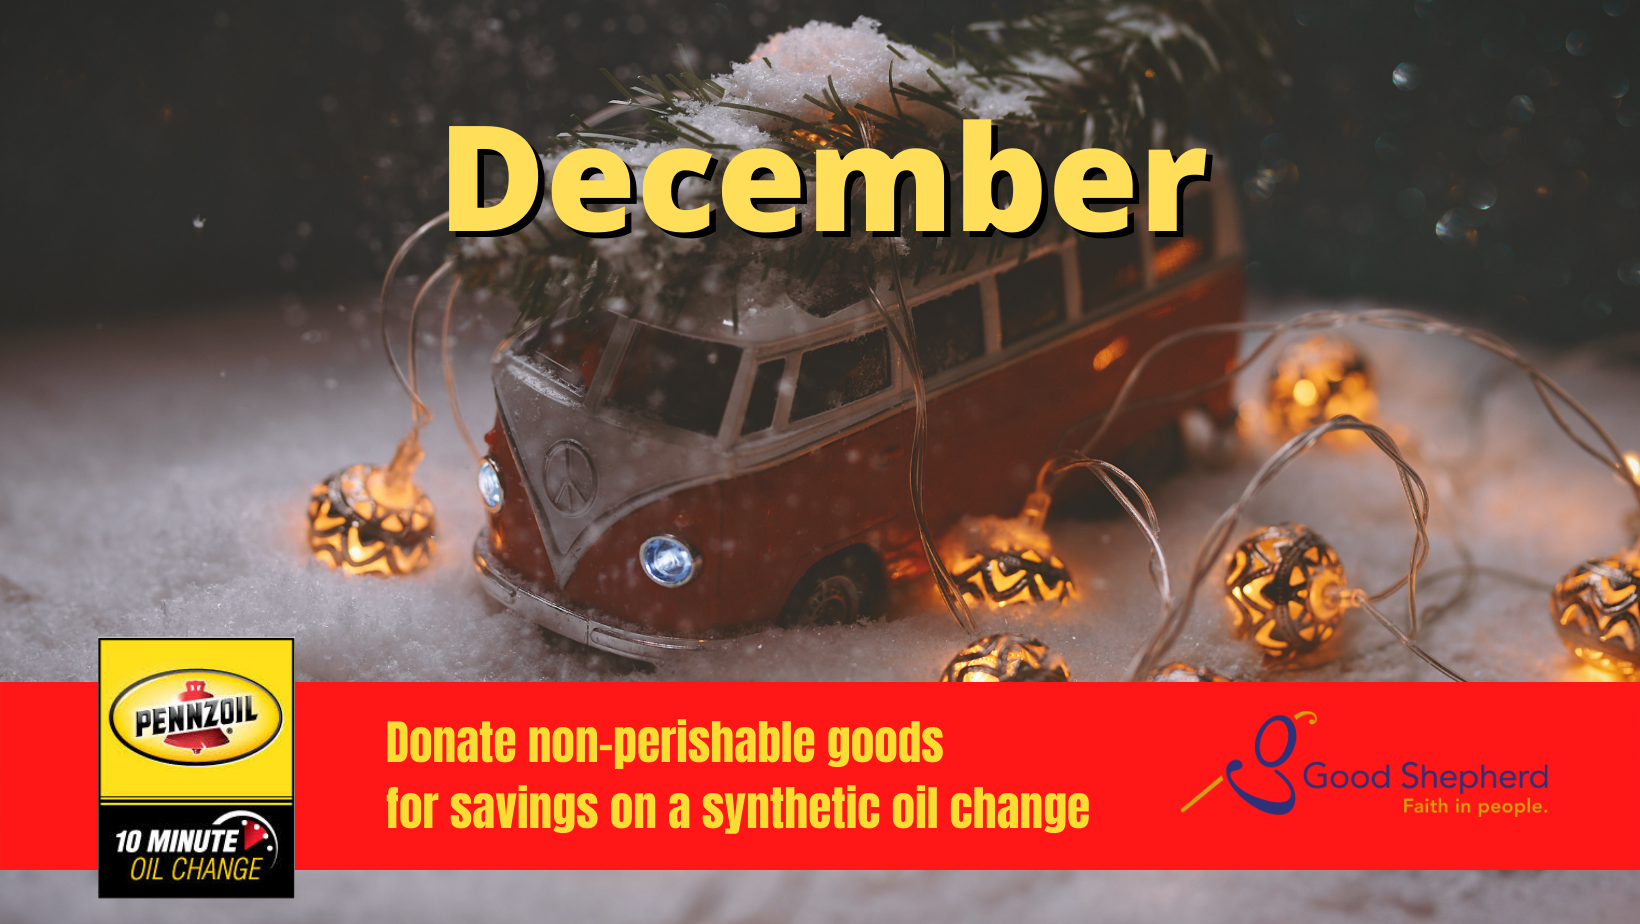 Christmas Good Shepherd food drive ... donate a non-perishable good and save $10 for any synthetic oil change>
</div><img style=